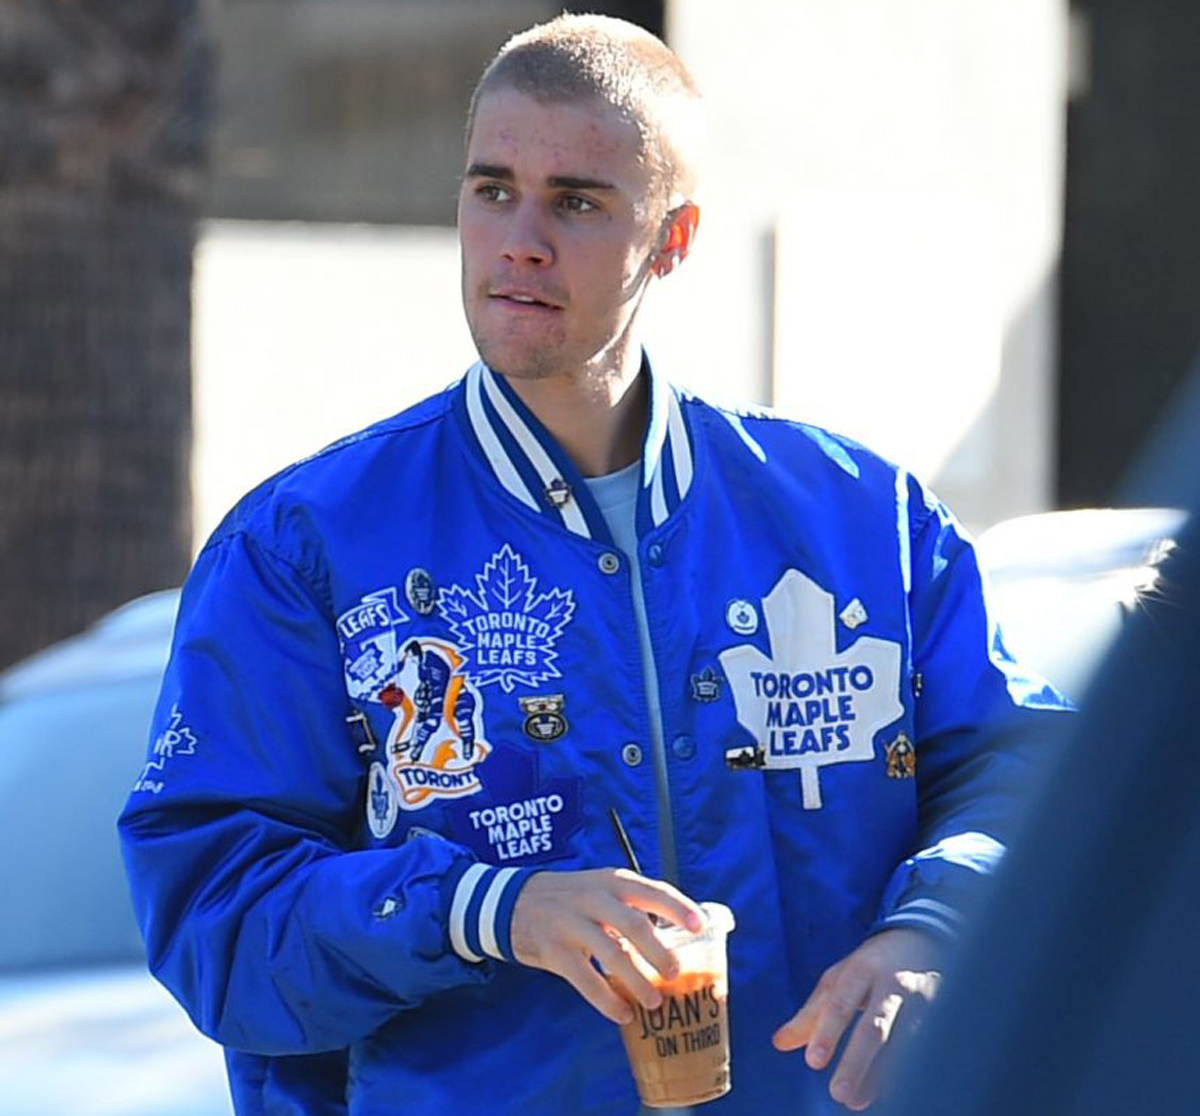 Justin Bieber's New Music Video Is A 'Love Letter' To The Maple